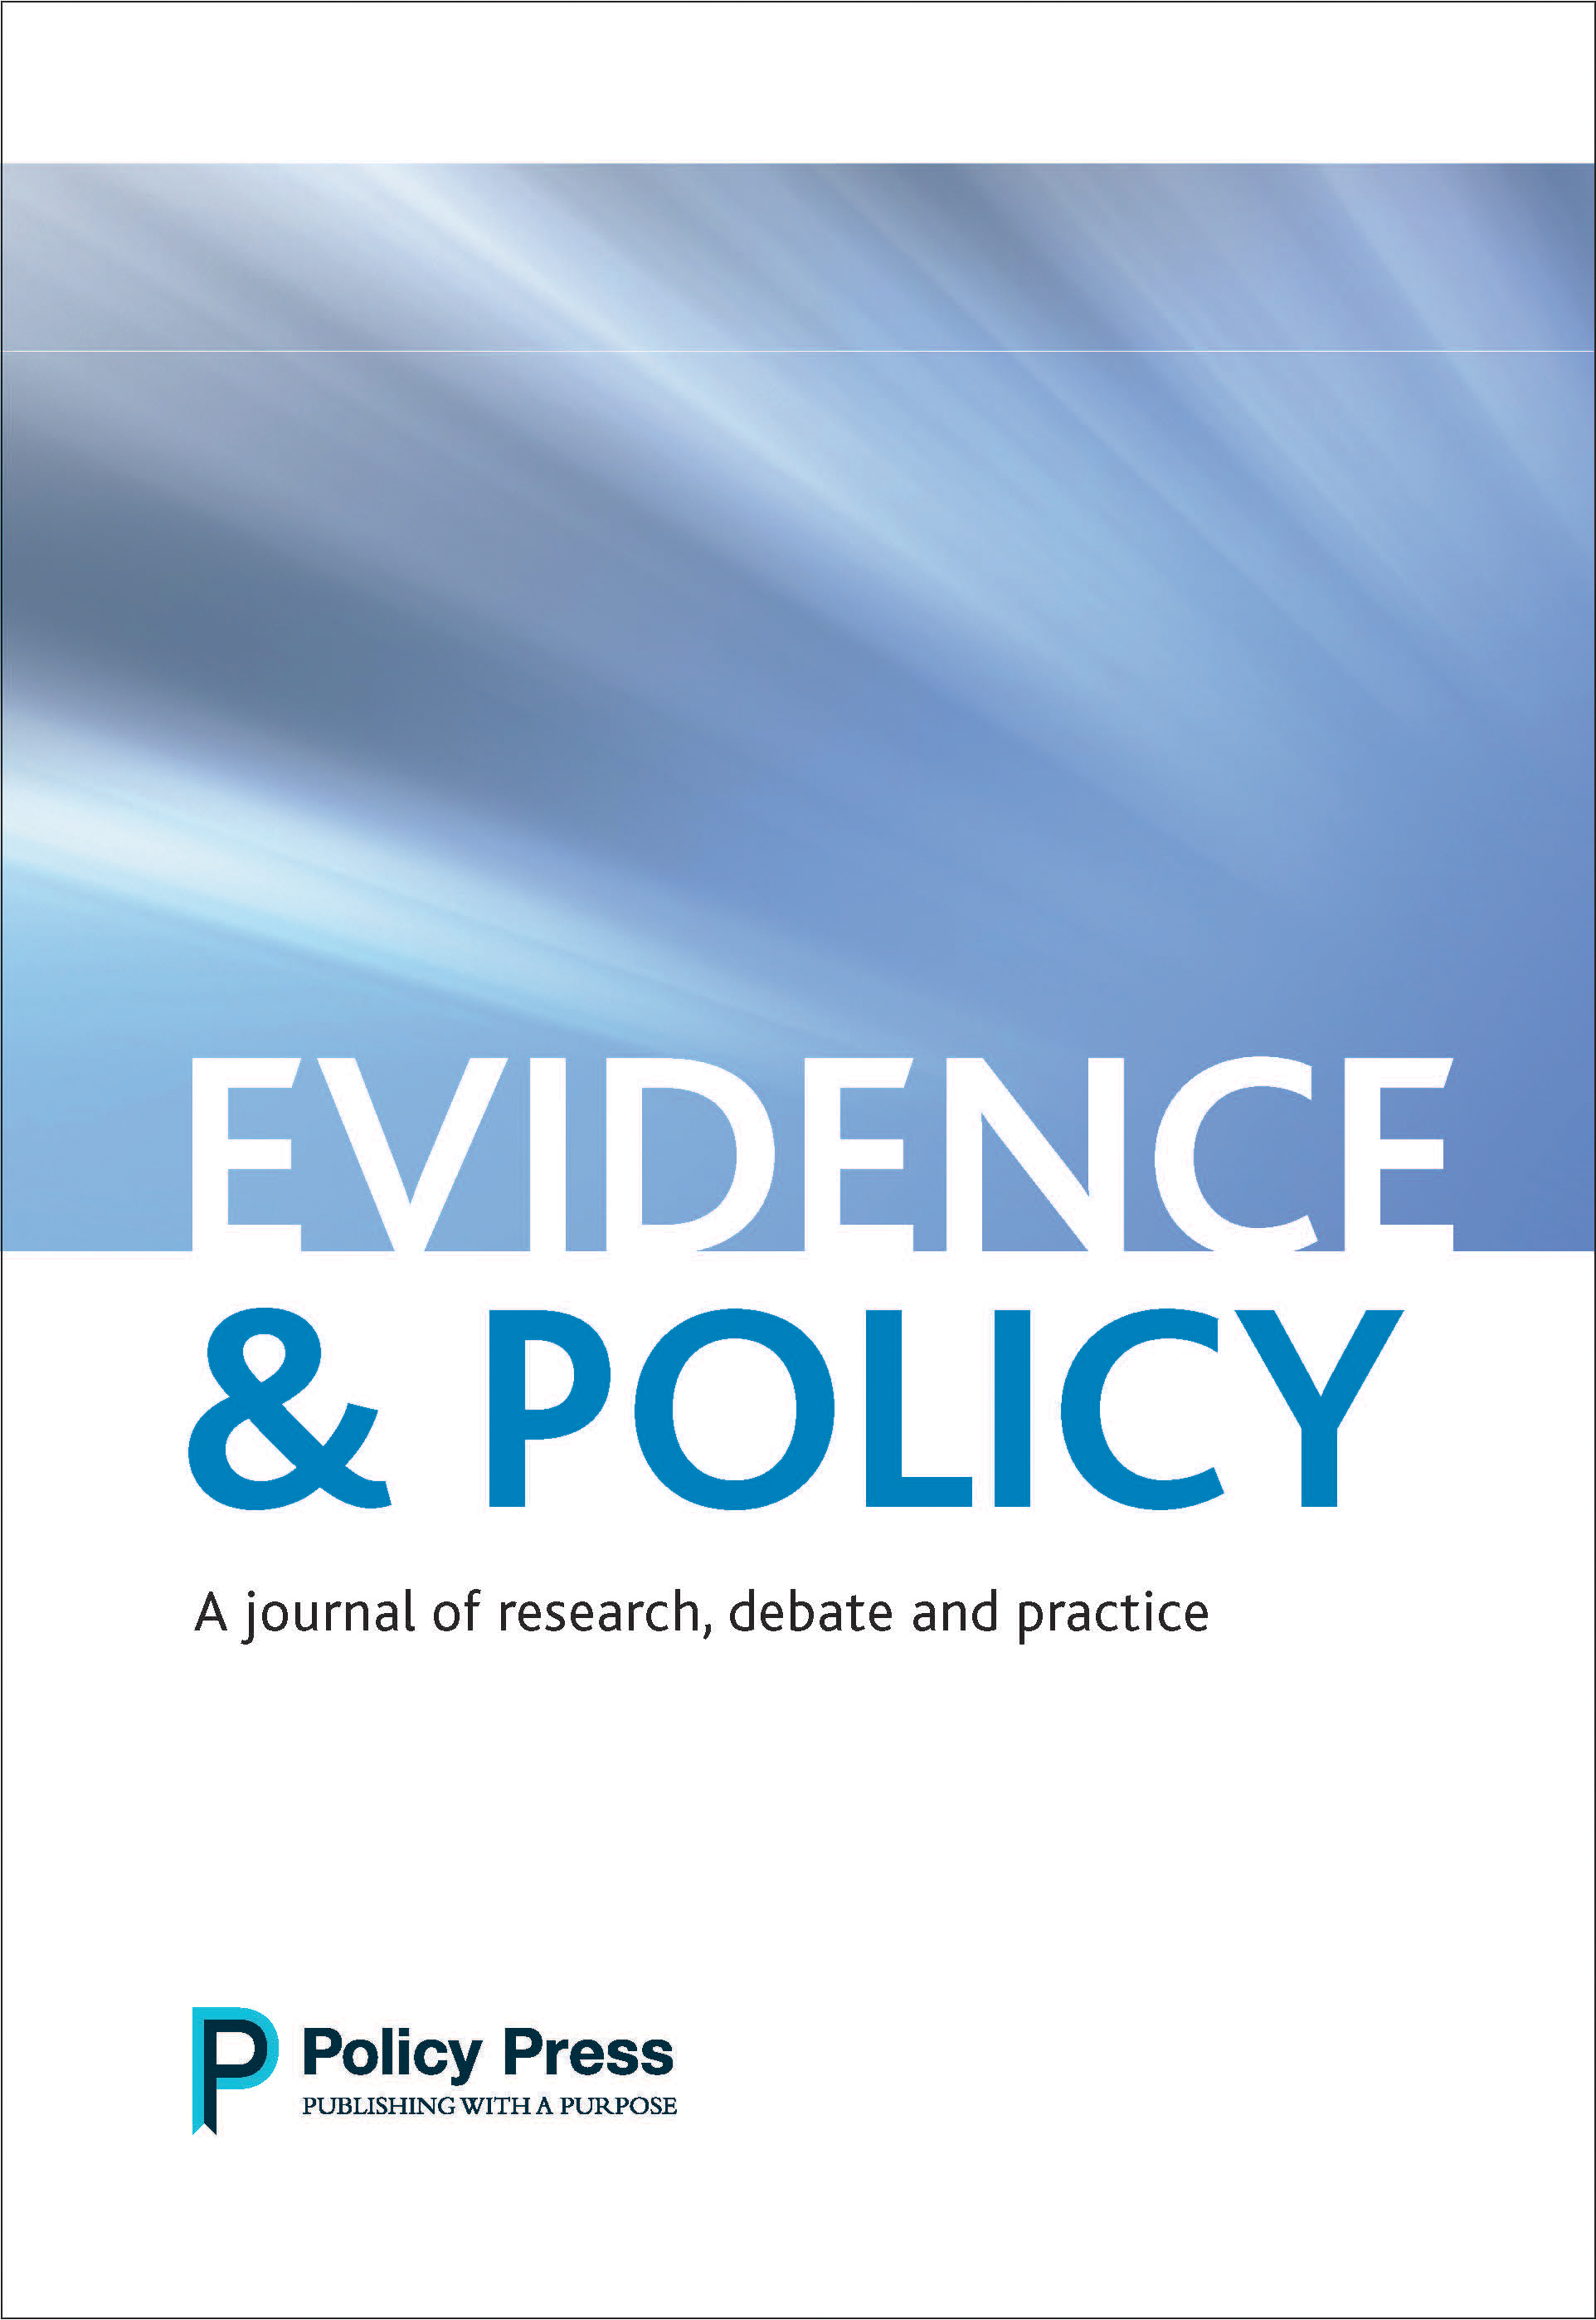 Evidence & Policy: Winner of the 2017 Carol Weiss Prize announced